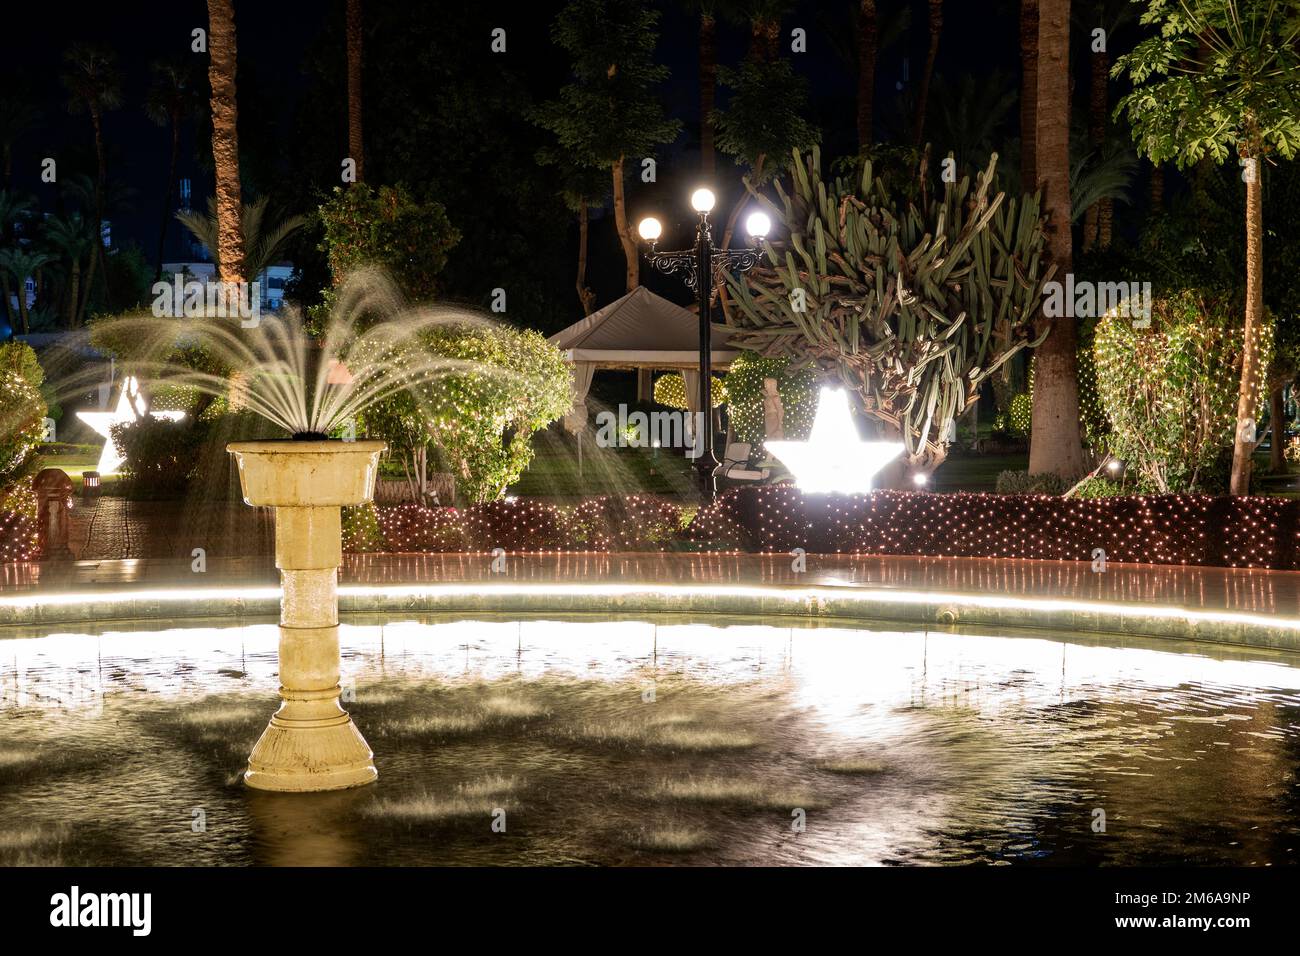 The floodlit garden of the Winter Palace Hotel Luxor Egypt during the Christmas season Stock Photo